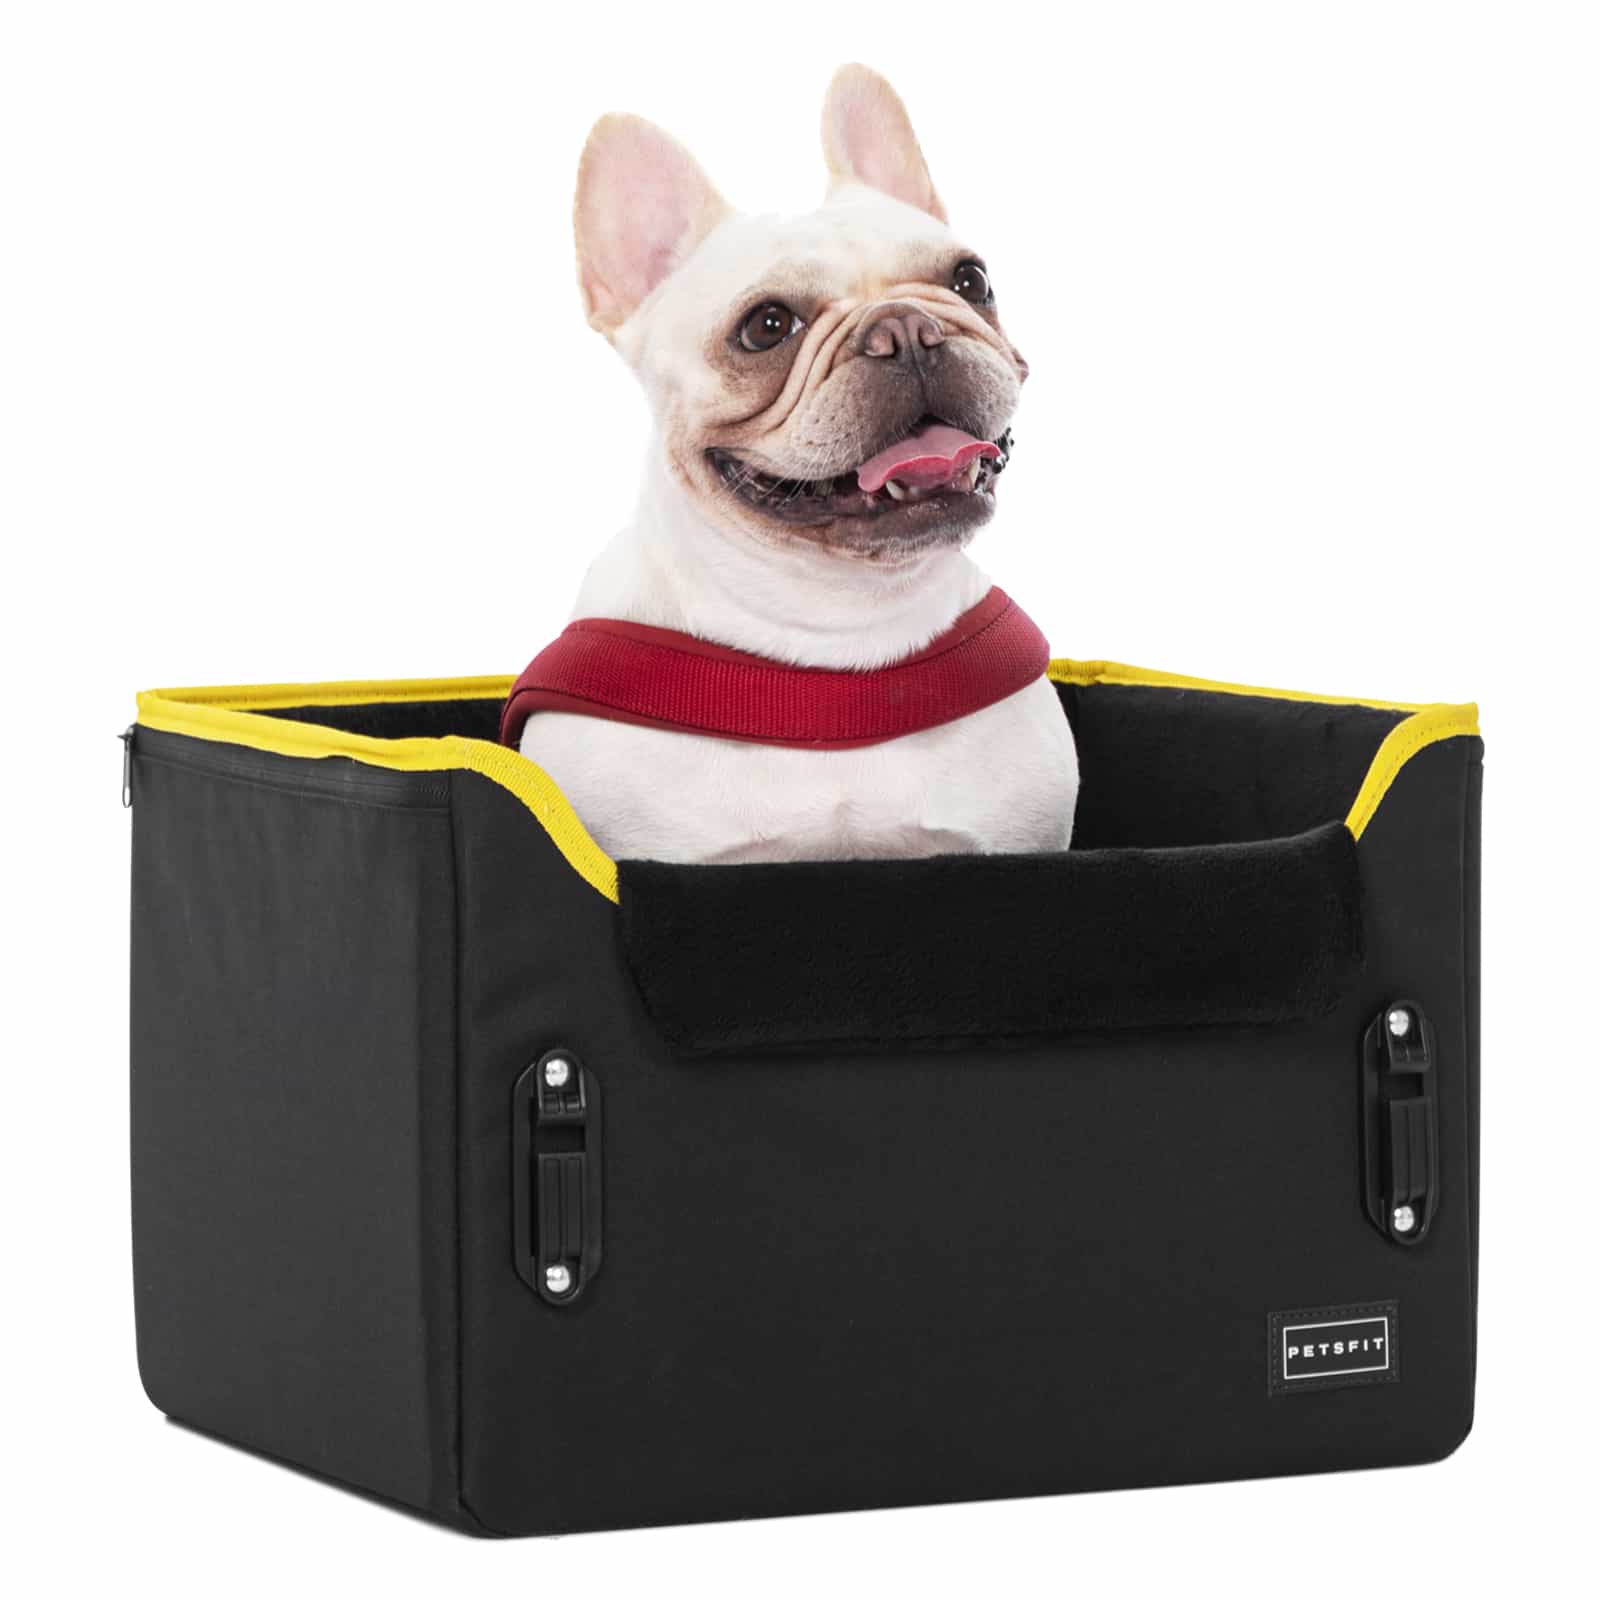 PETSFIT Dog Car Seats for Small Dogs Puppy Stable Pet Car Seat